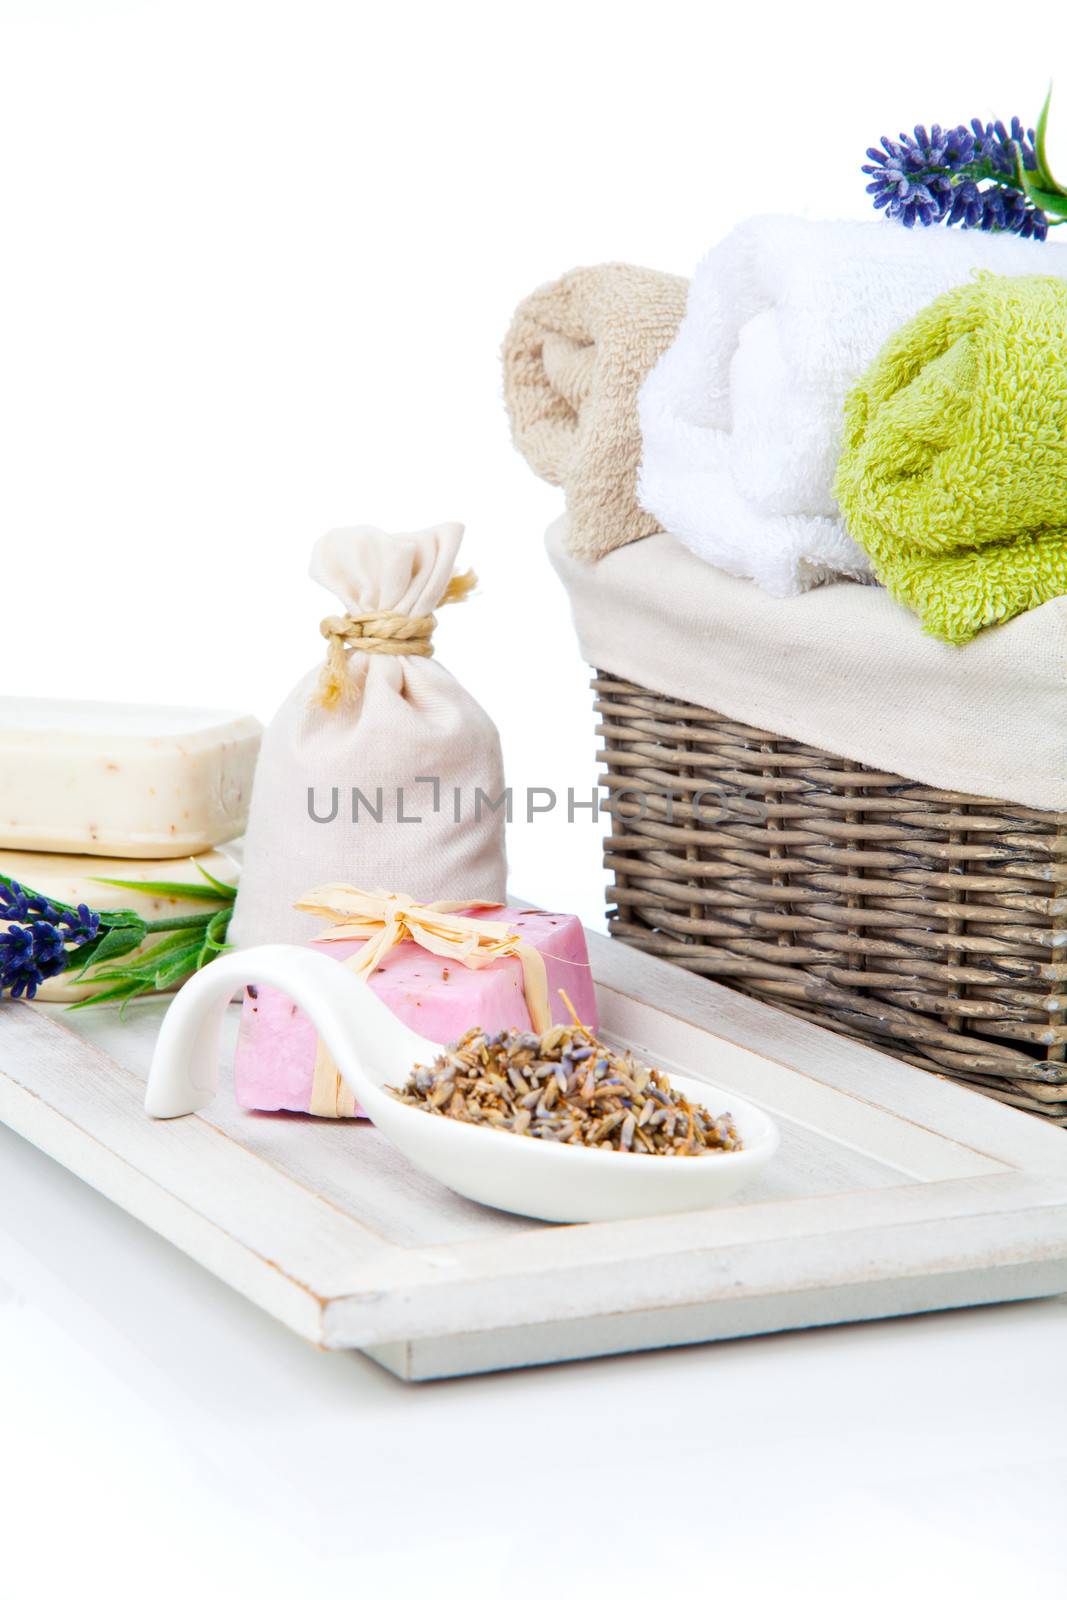 toiletries for relaxation - towel, soap, isolated on white background